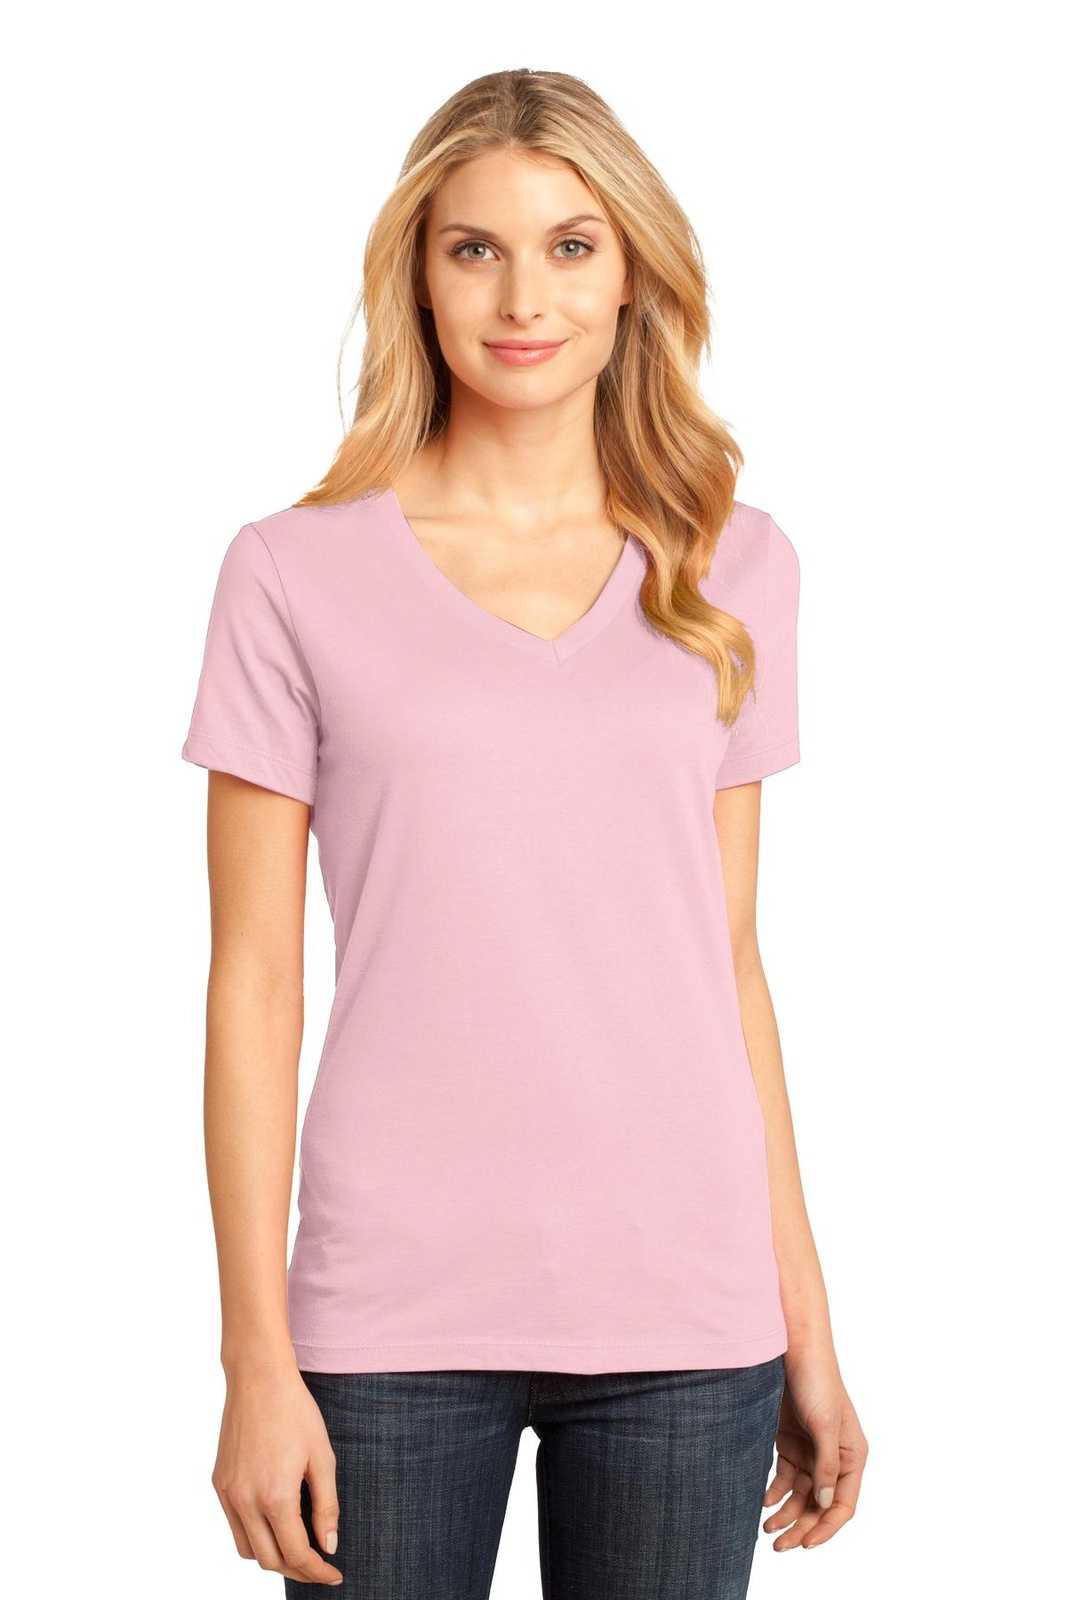 District DM1170L Women's Perfect Weight V-Neck Tee - Light Pink - HIT a Double - 1